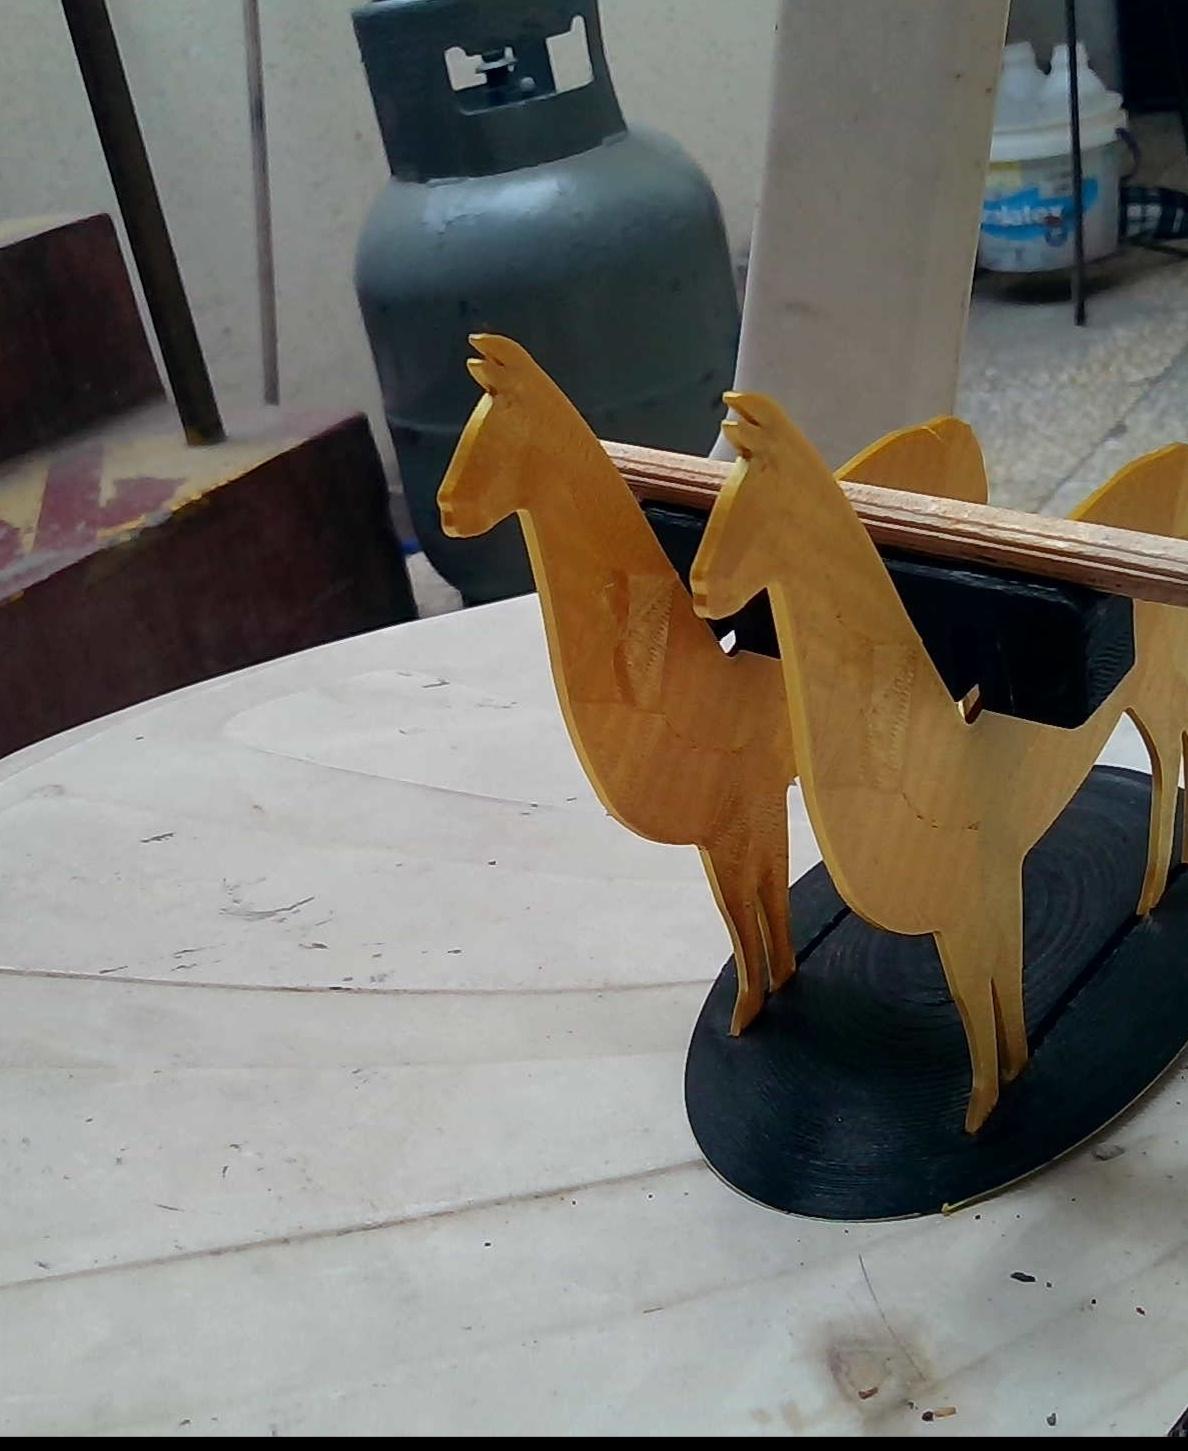 llama cell phone stand - wooden dowel but pisco jars not added...yet - 3d model